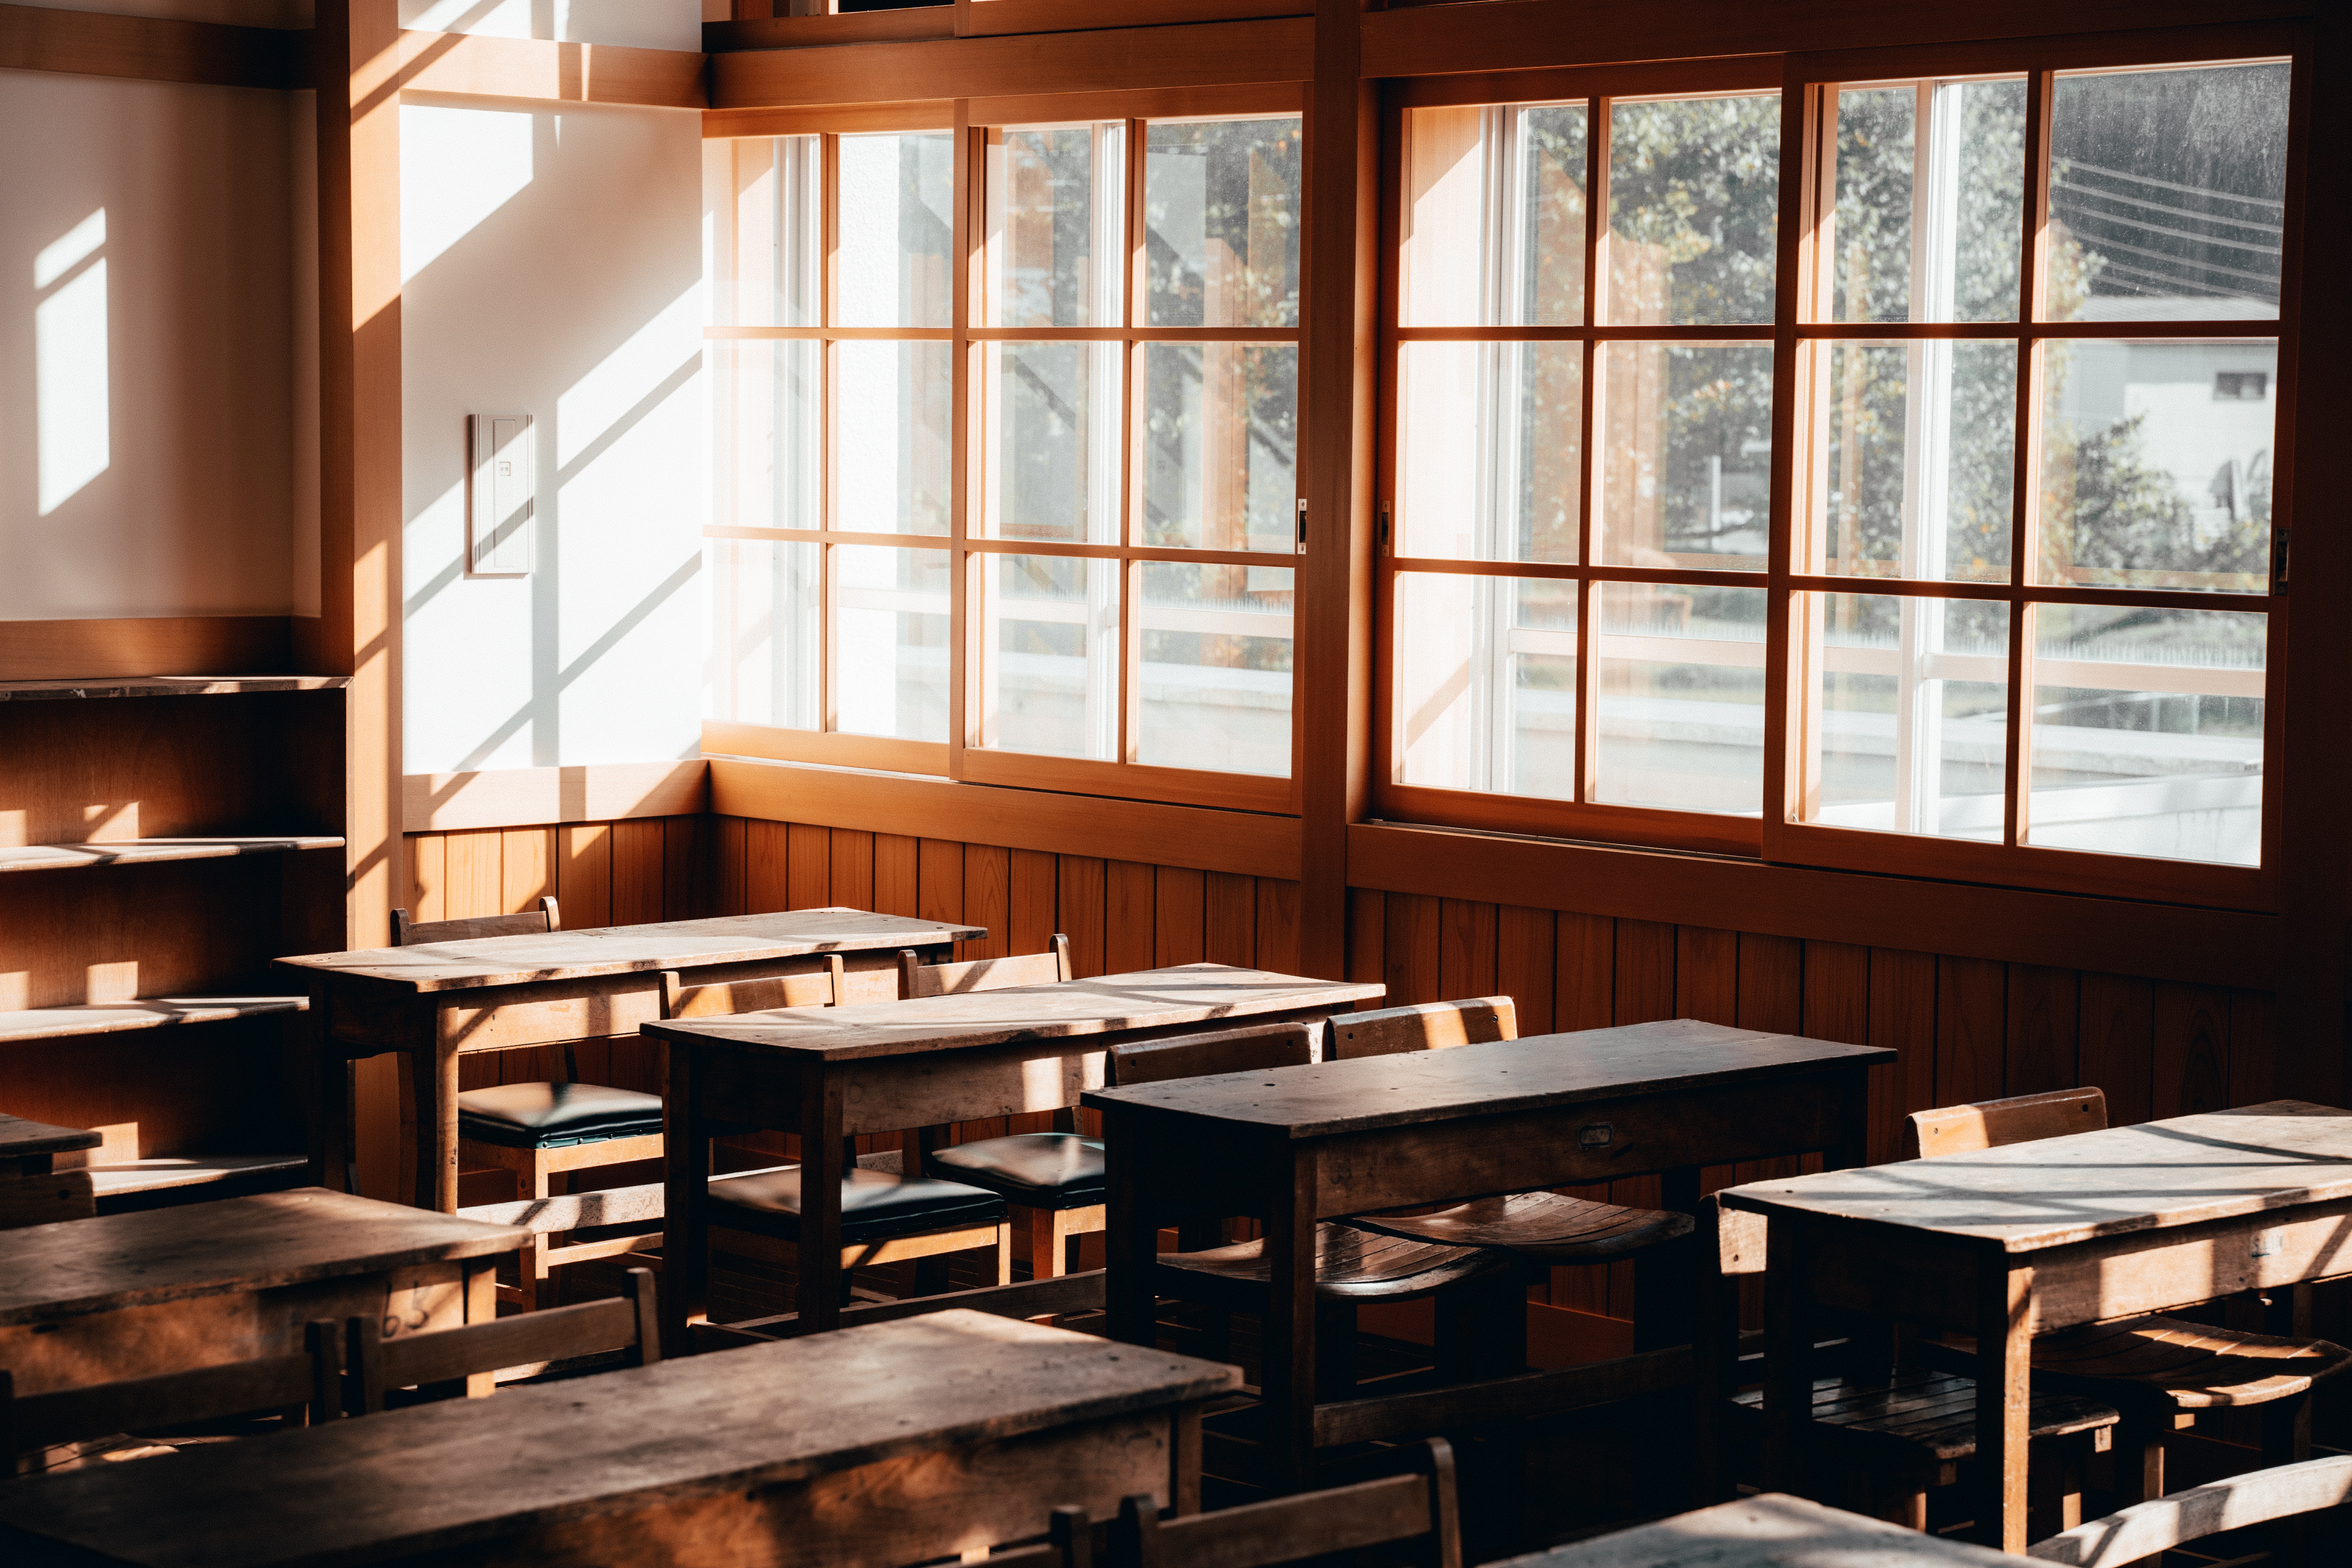 A classroom with old wooden desks and chairs, sun shining in through the windows.